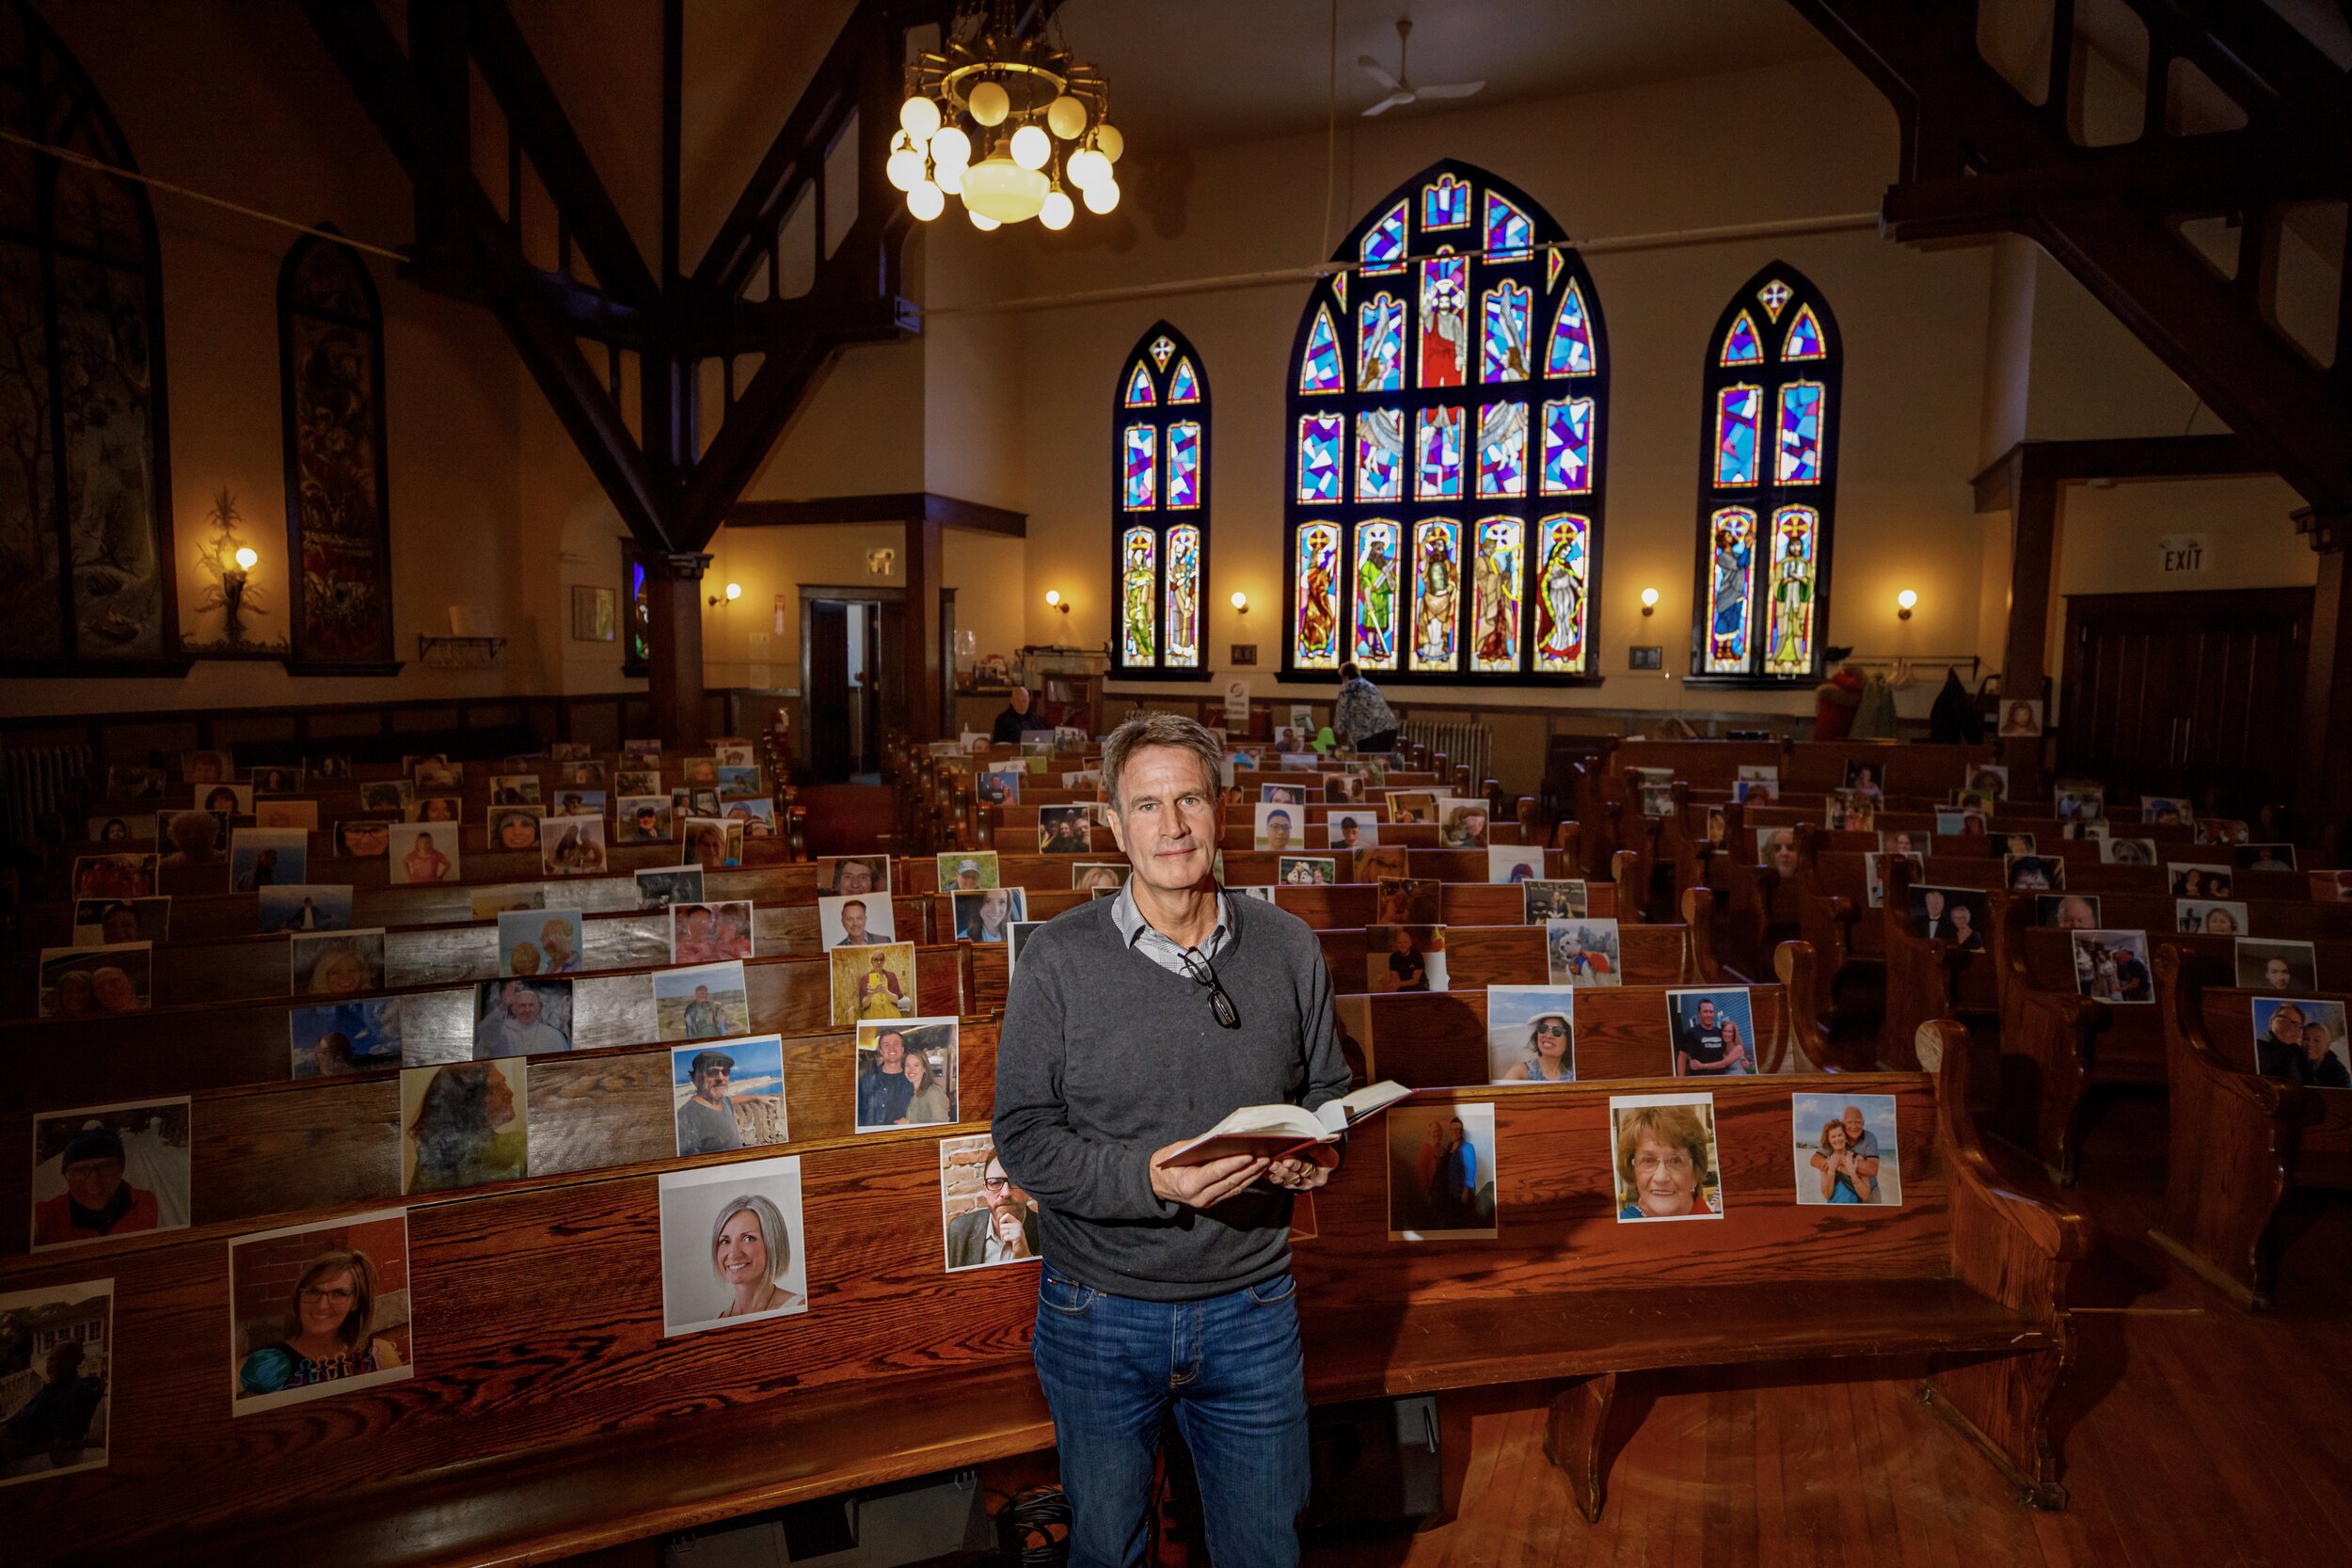  Rev. Jon Pentland, minister of Hillhurst United Church in Calgary, Alberta, with photos of community members on the pews after they started online only church services because of the COVID-19 pandemic. 